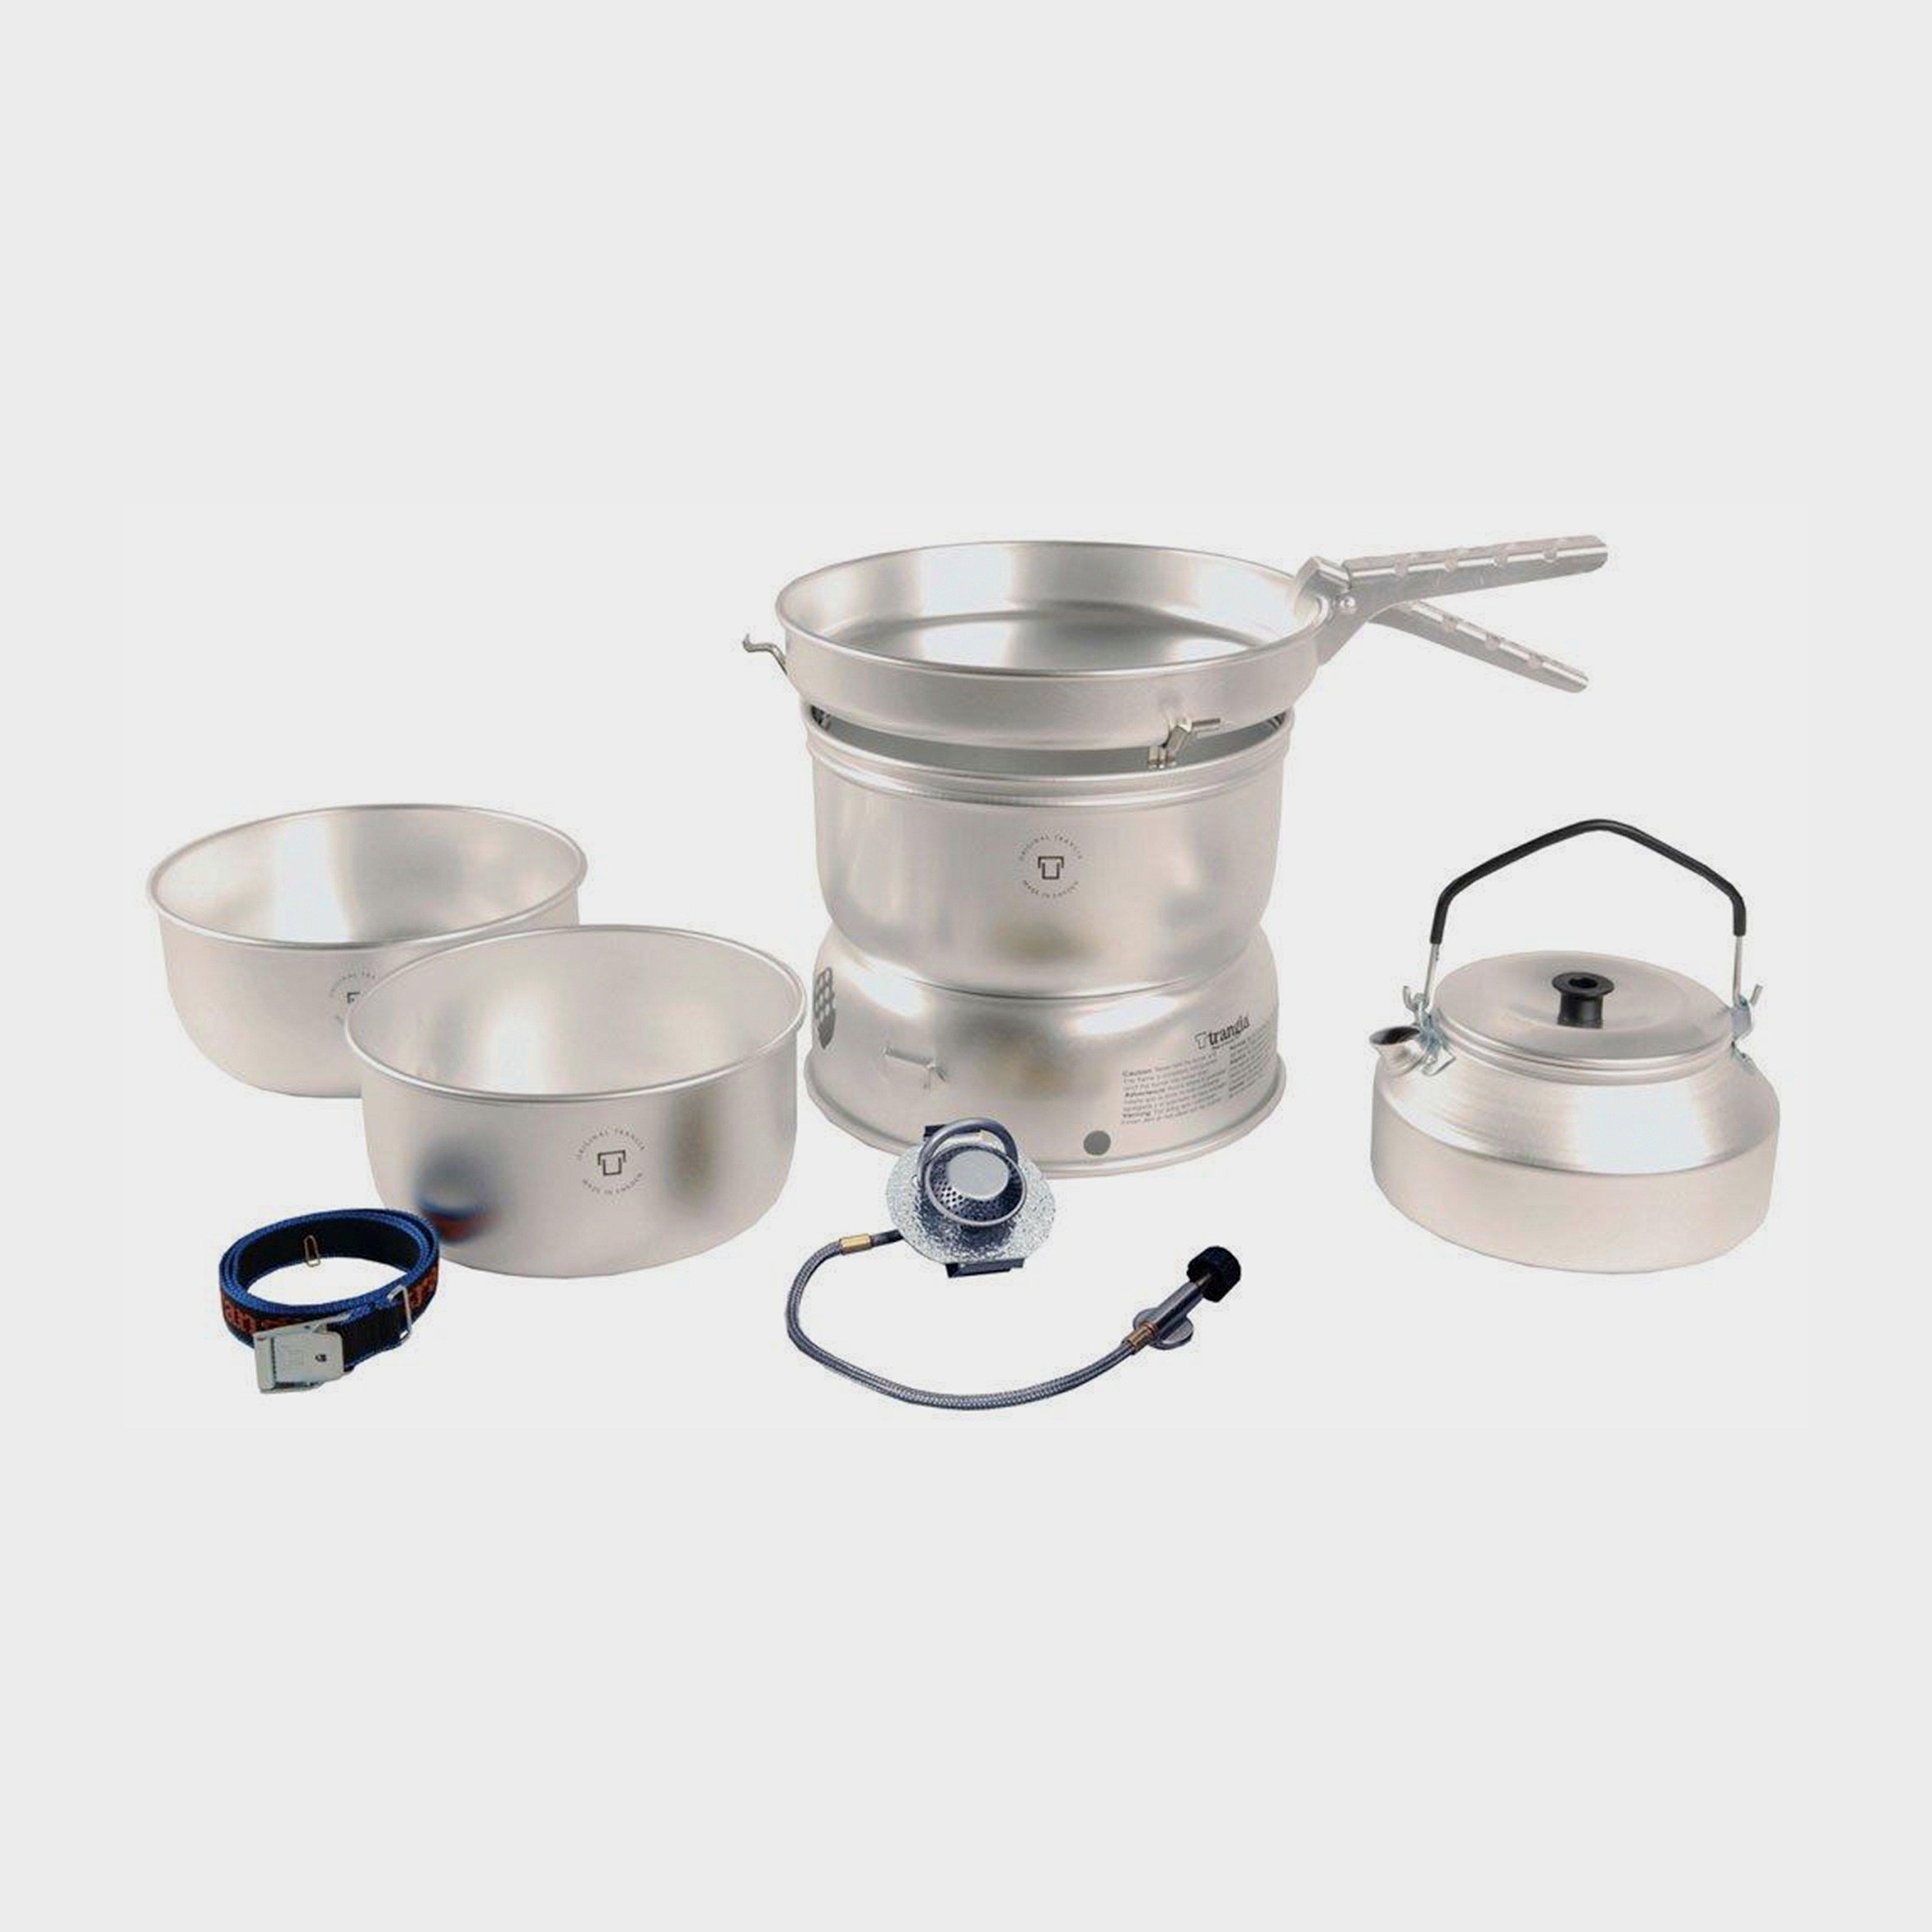  Trangia 25-2 GB Stove with Alloy Pans, Kettle & Gas Burner, Silver